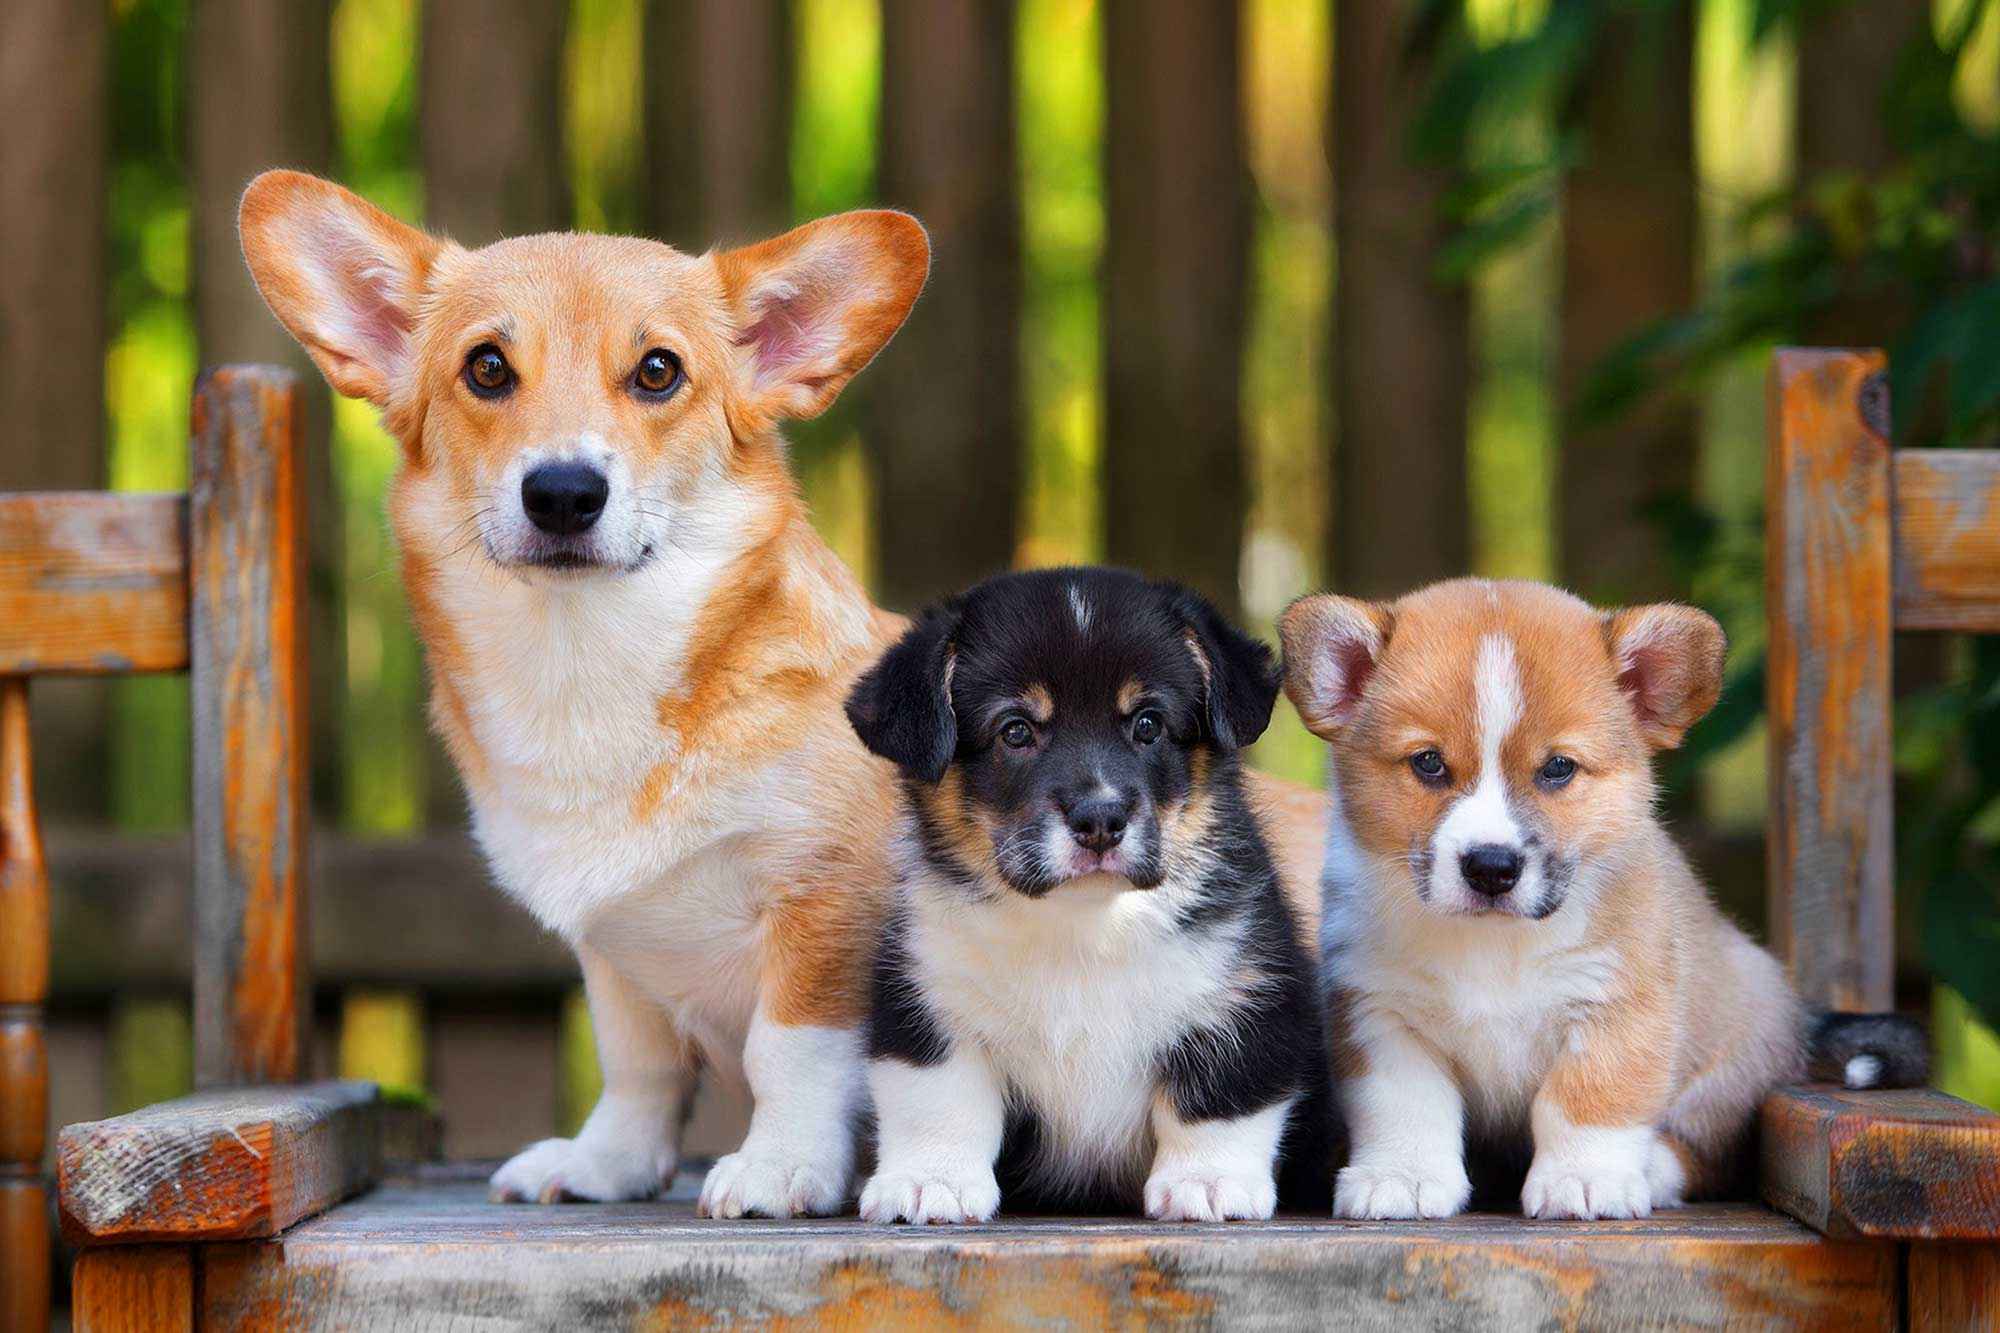 Three dogs sitting on a bench in front of a fence.